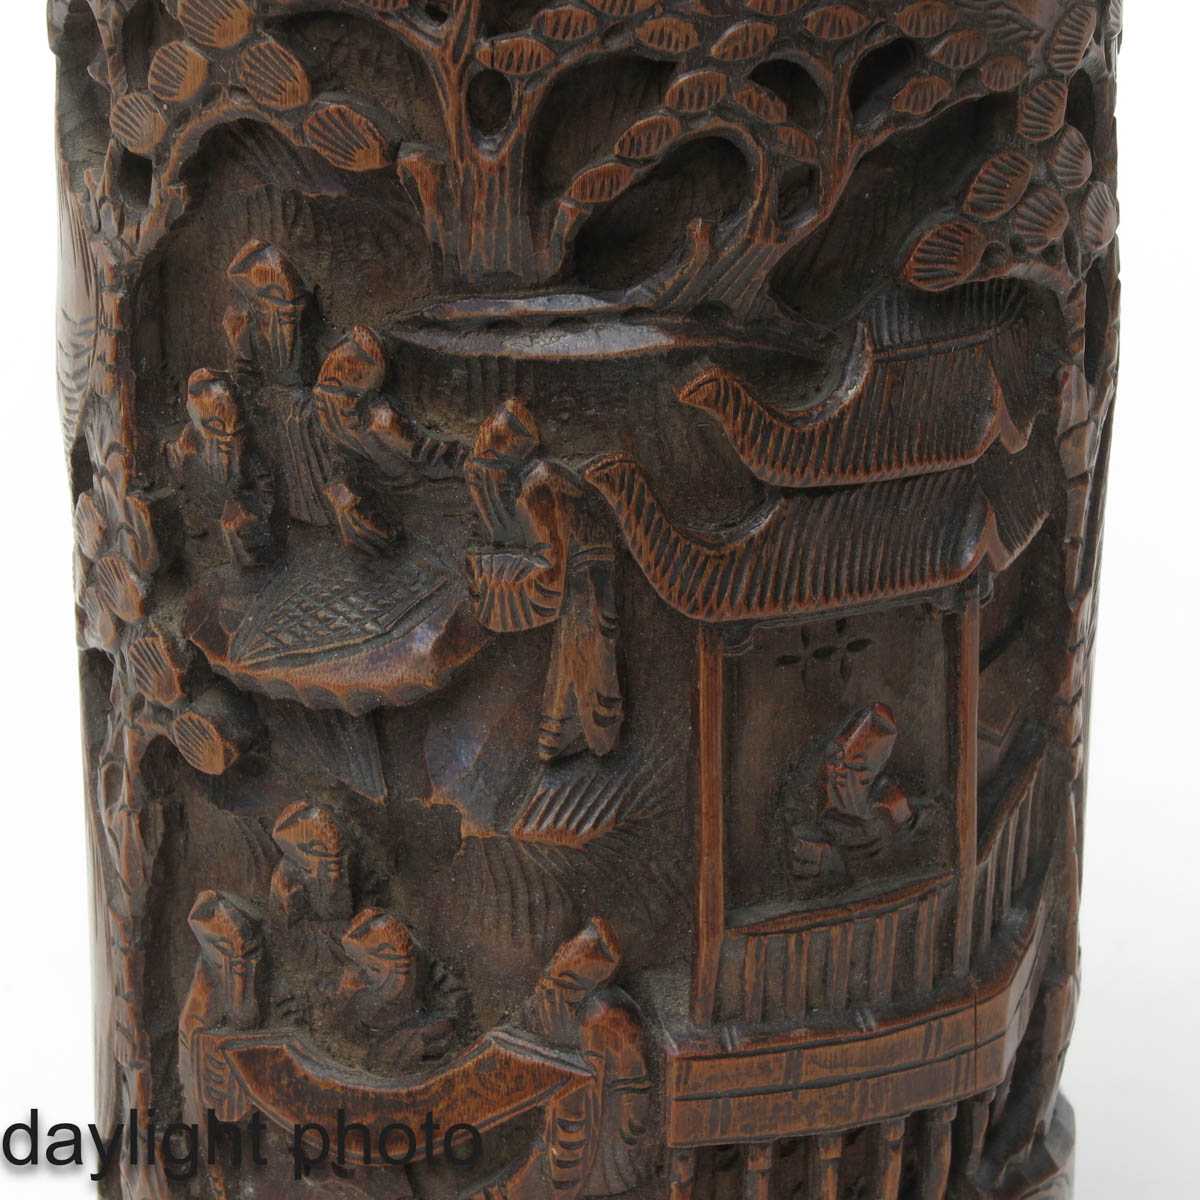 A Collection of 3 Carved Wood Items - Image 9 of 10